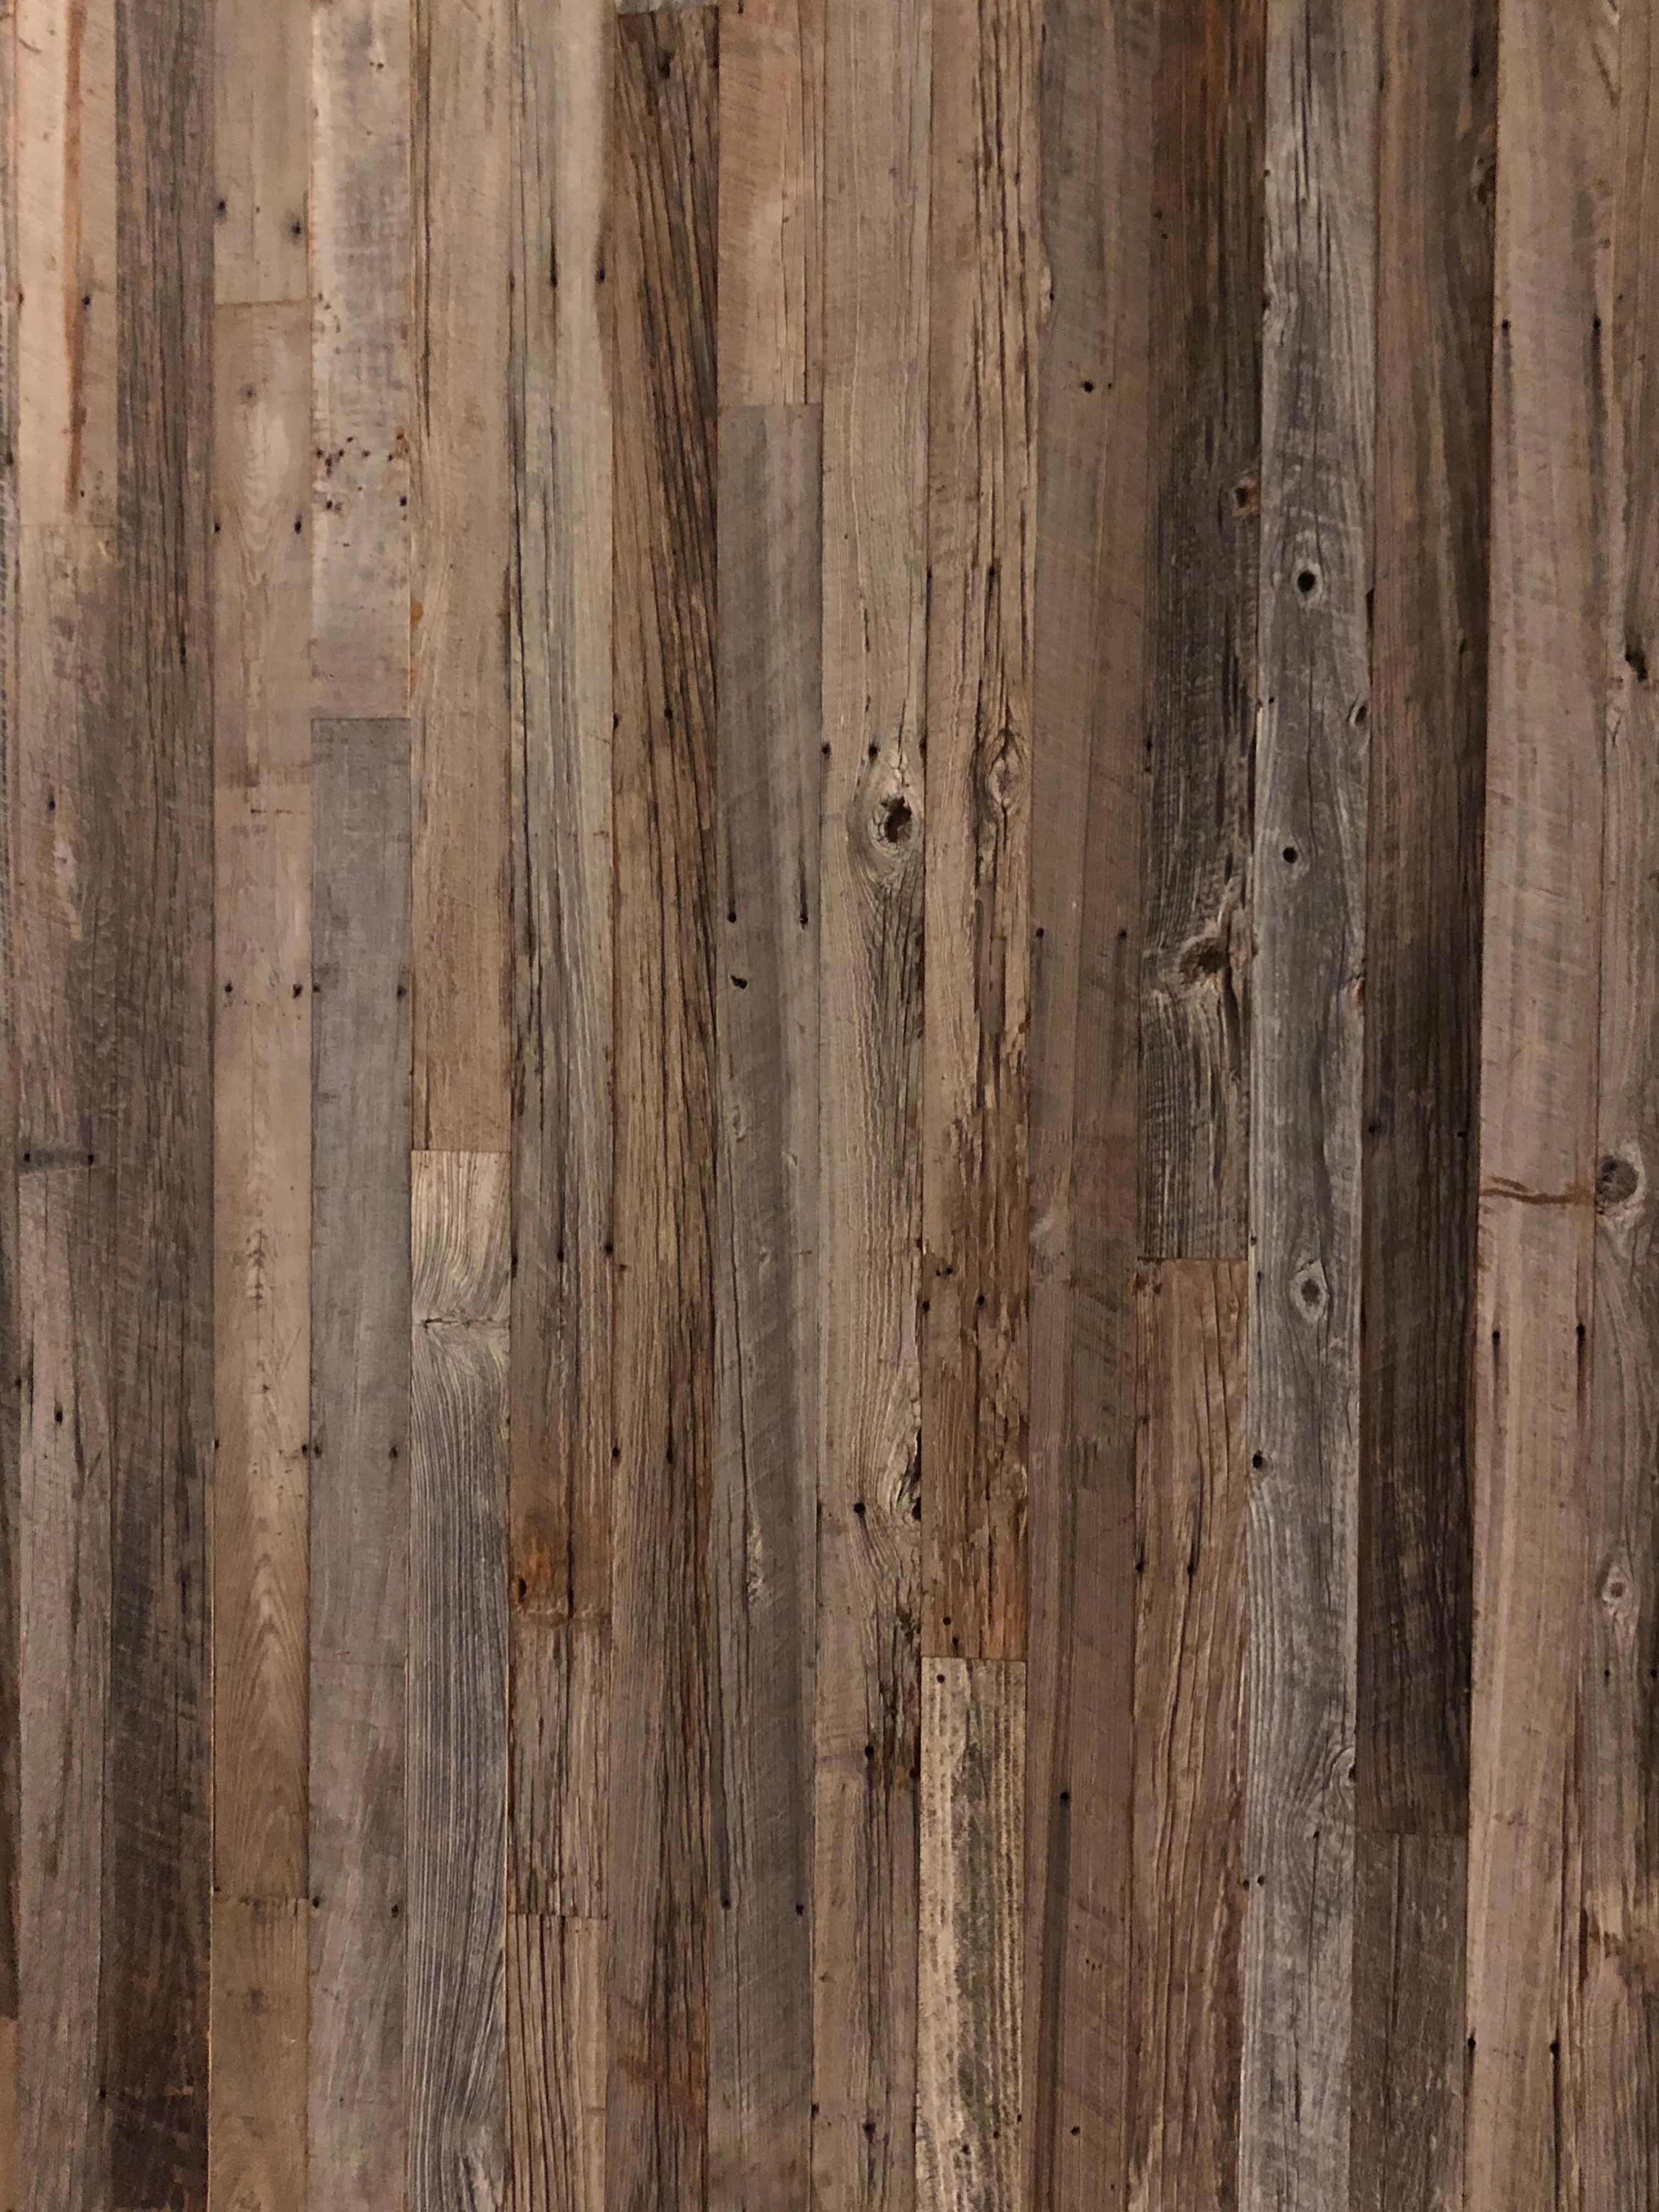 Reclaimed solid wood oak flooring from France.
Excellent finishing and character in the original authentic texture.
Price per square foot. Available right now. Worldwide and Inland USA shipping.
Possible for your contractor to apply different